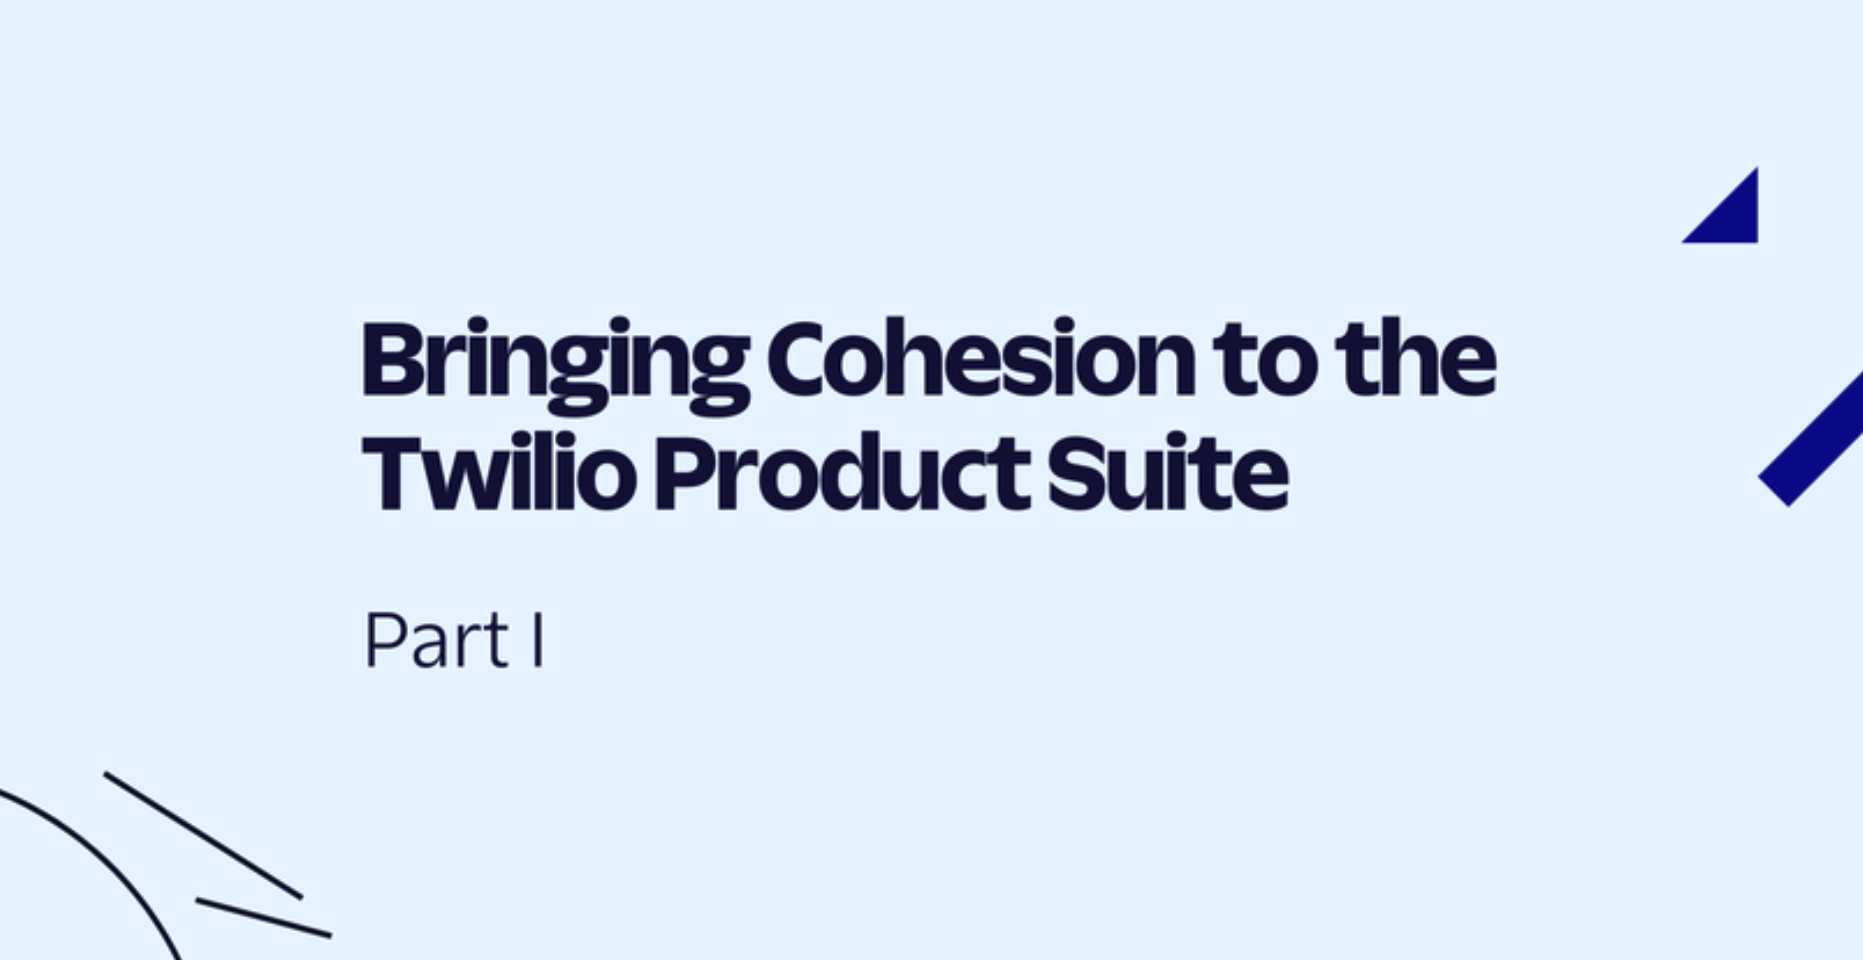 Text on a blue background reading 'Bringing Cohesion to the Twilio Product Suite; Part I